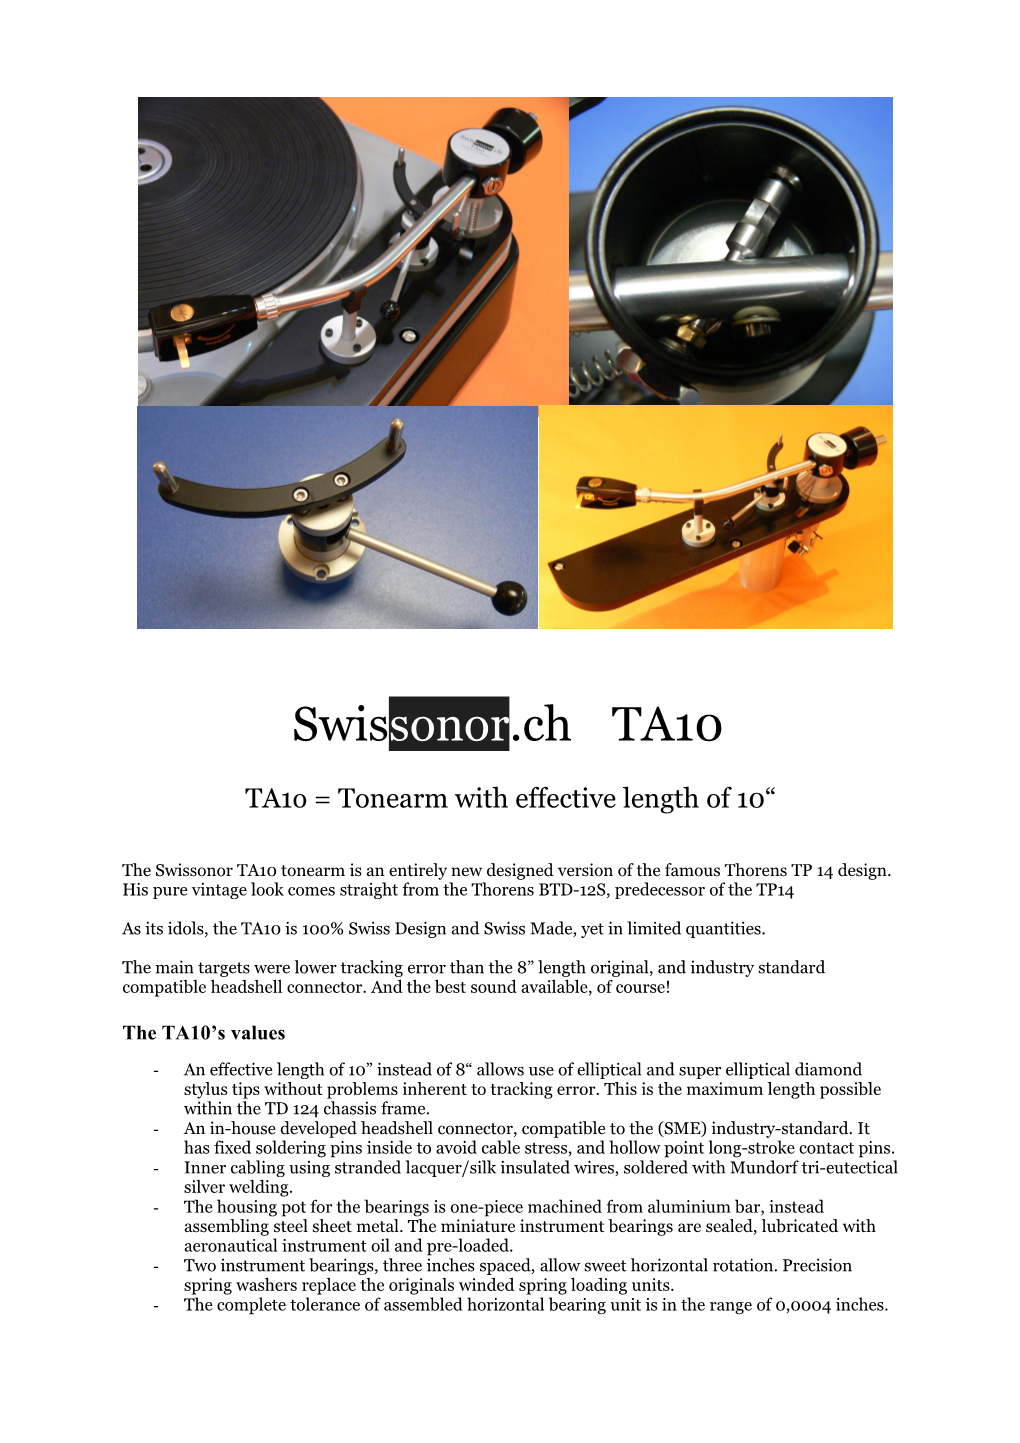 The Swissonor TA10 Tonearm Is an Entirely New Designed Version of the Famous Thorens TP